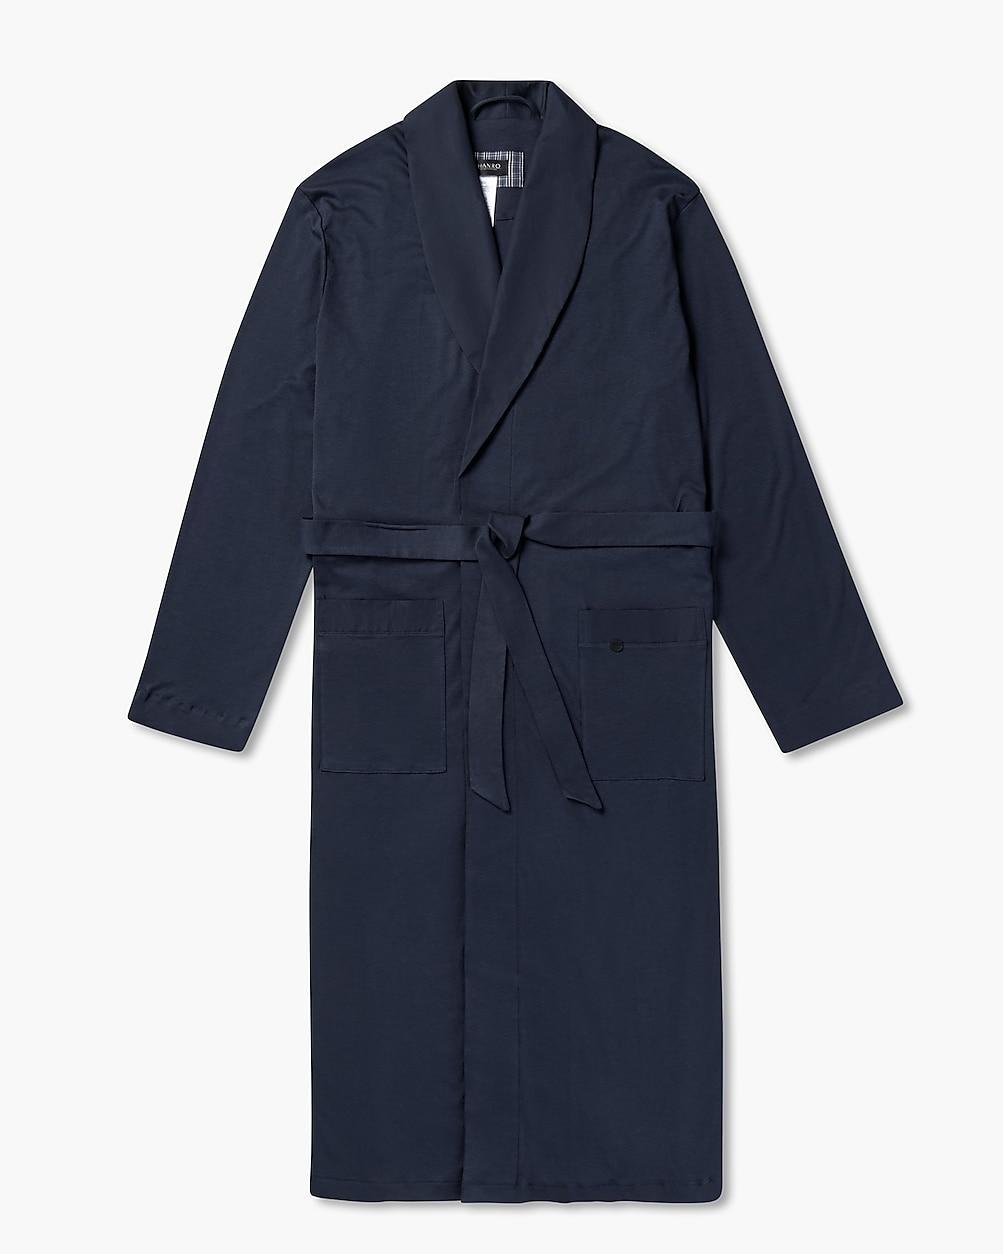 HANRO® night and day knit robe by J.CREW